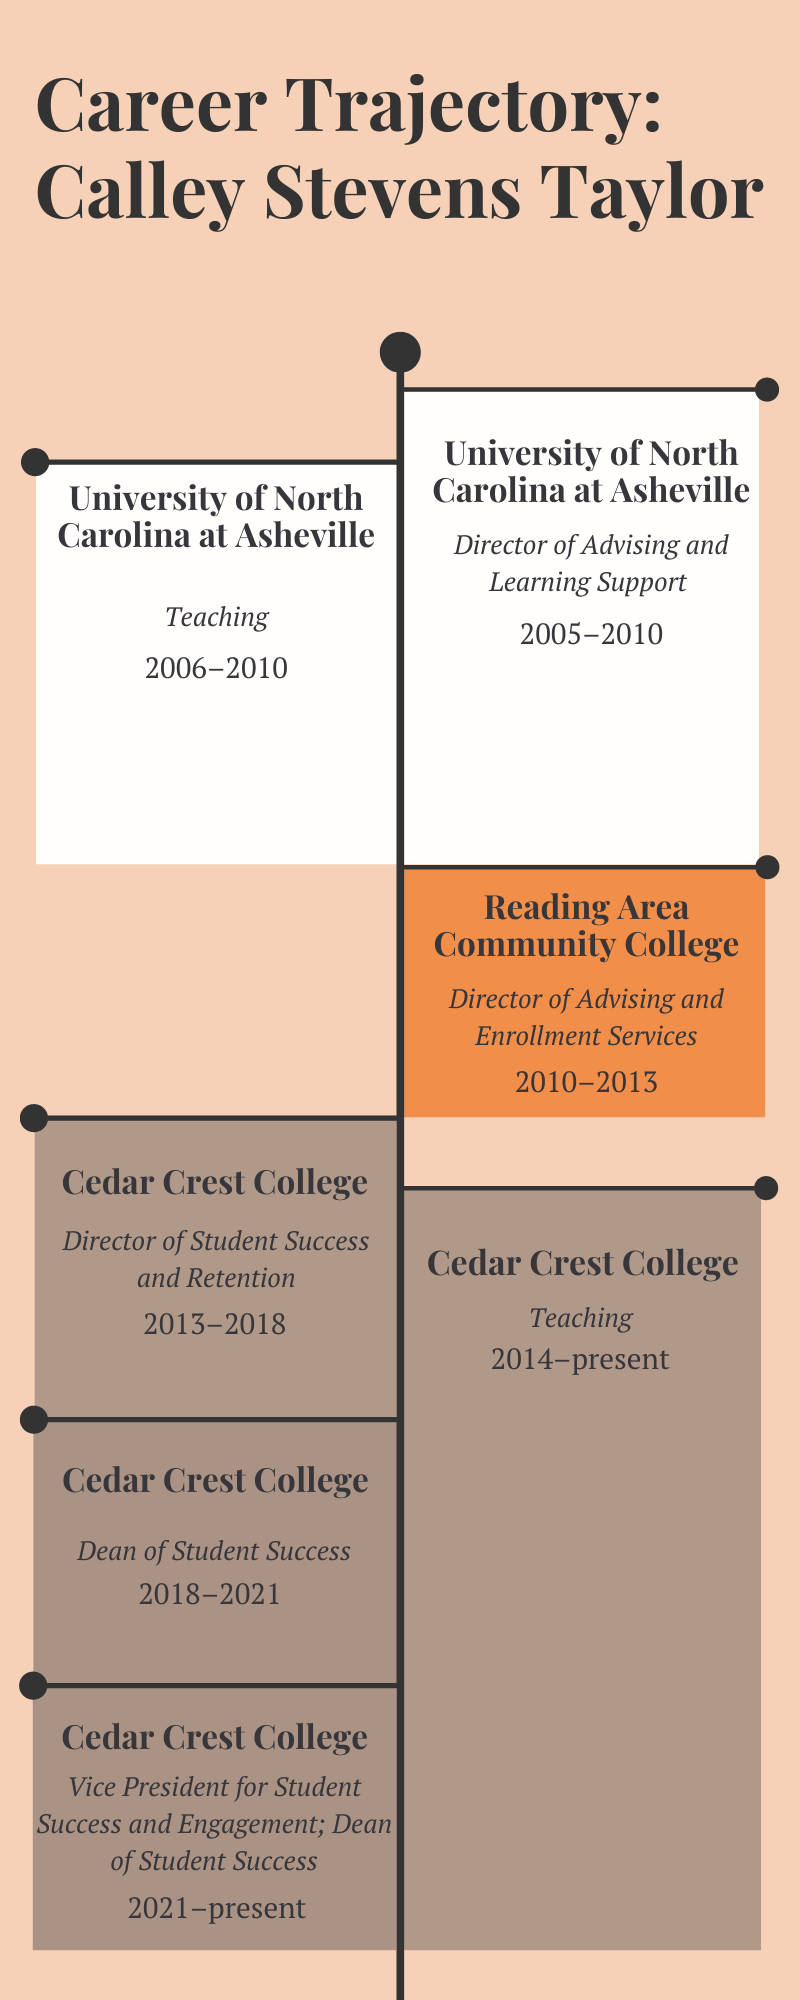 An infographic timeline of Calley Stevens Taylor's career.